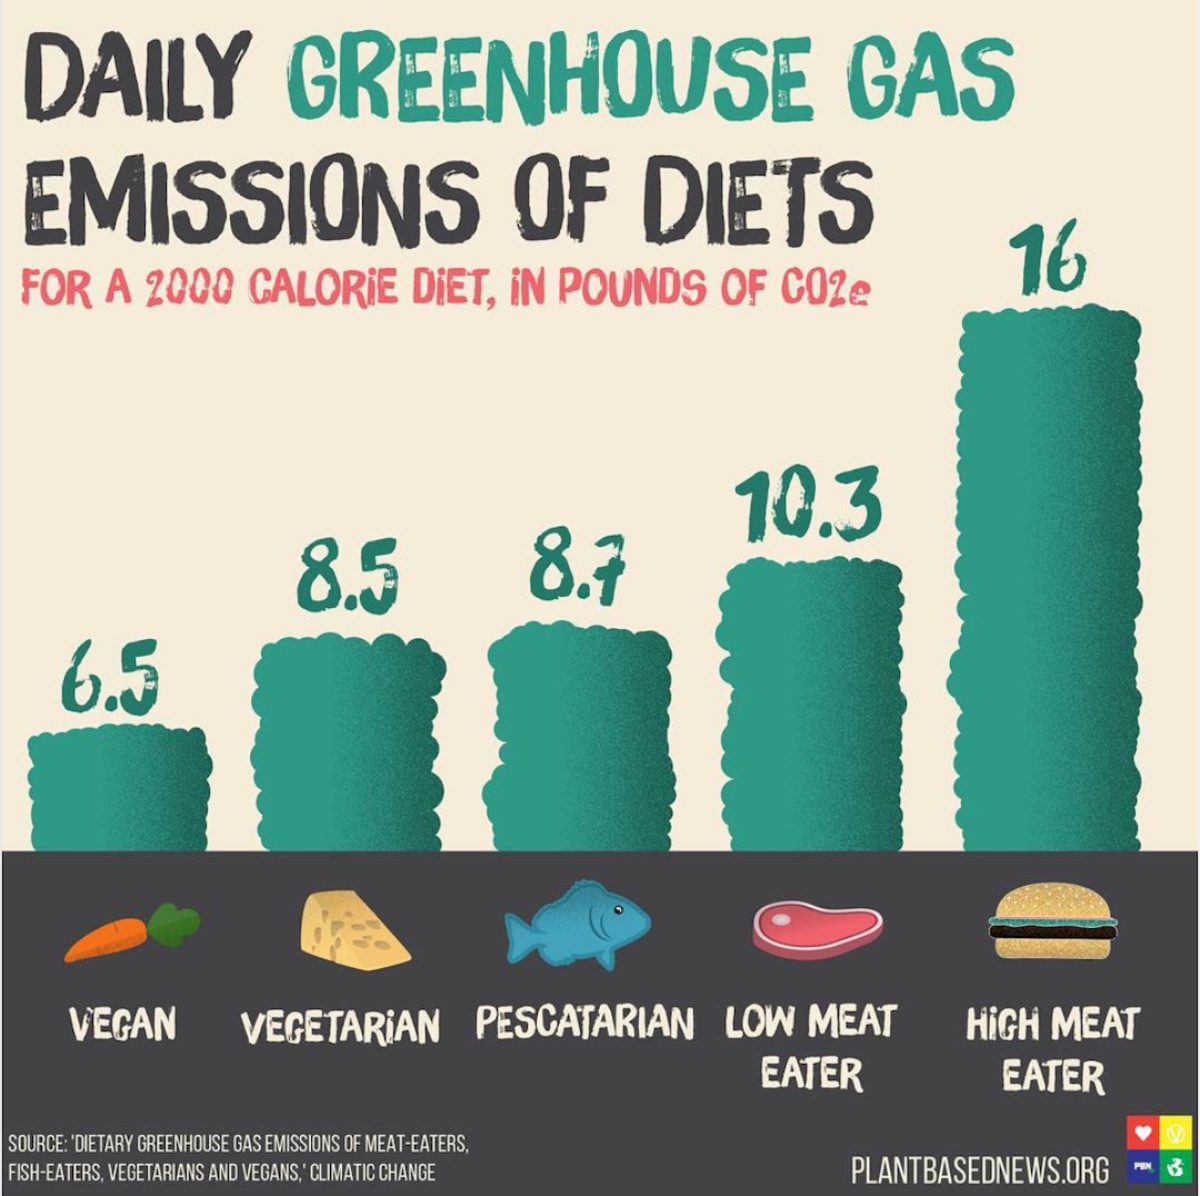 Daily Greenhouse Gas Emission of Diets